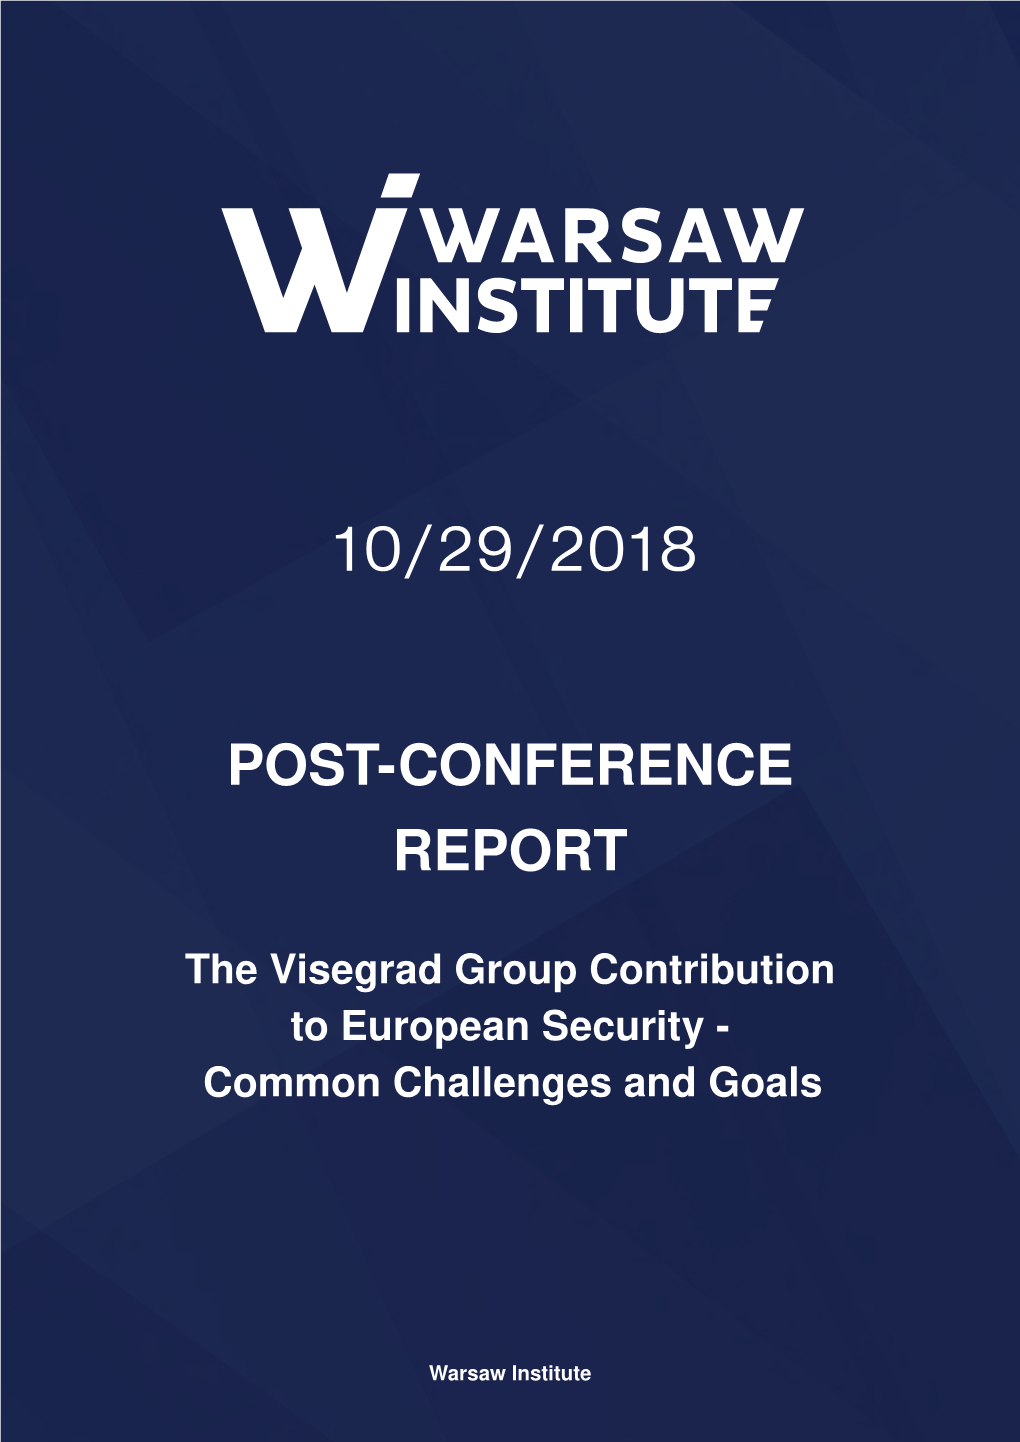 Post-Conference Report